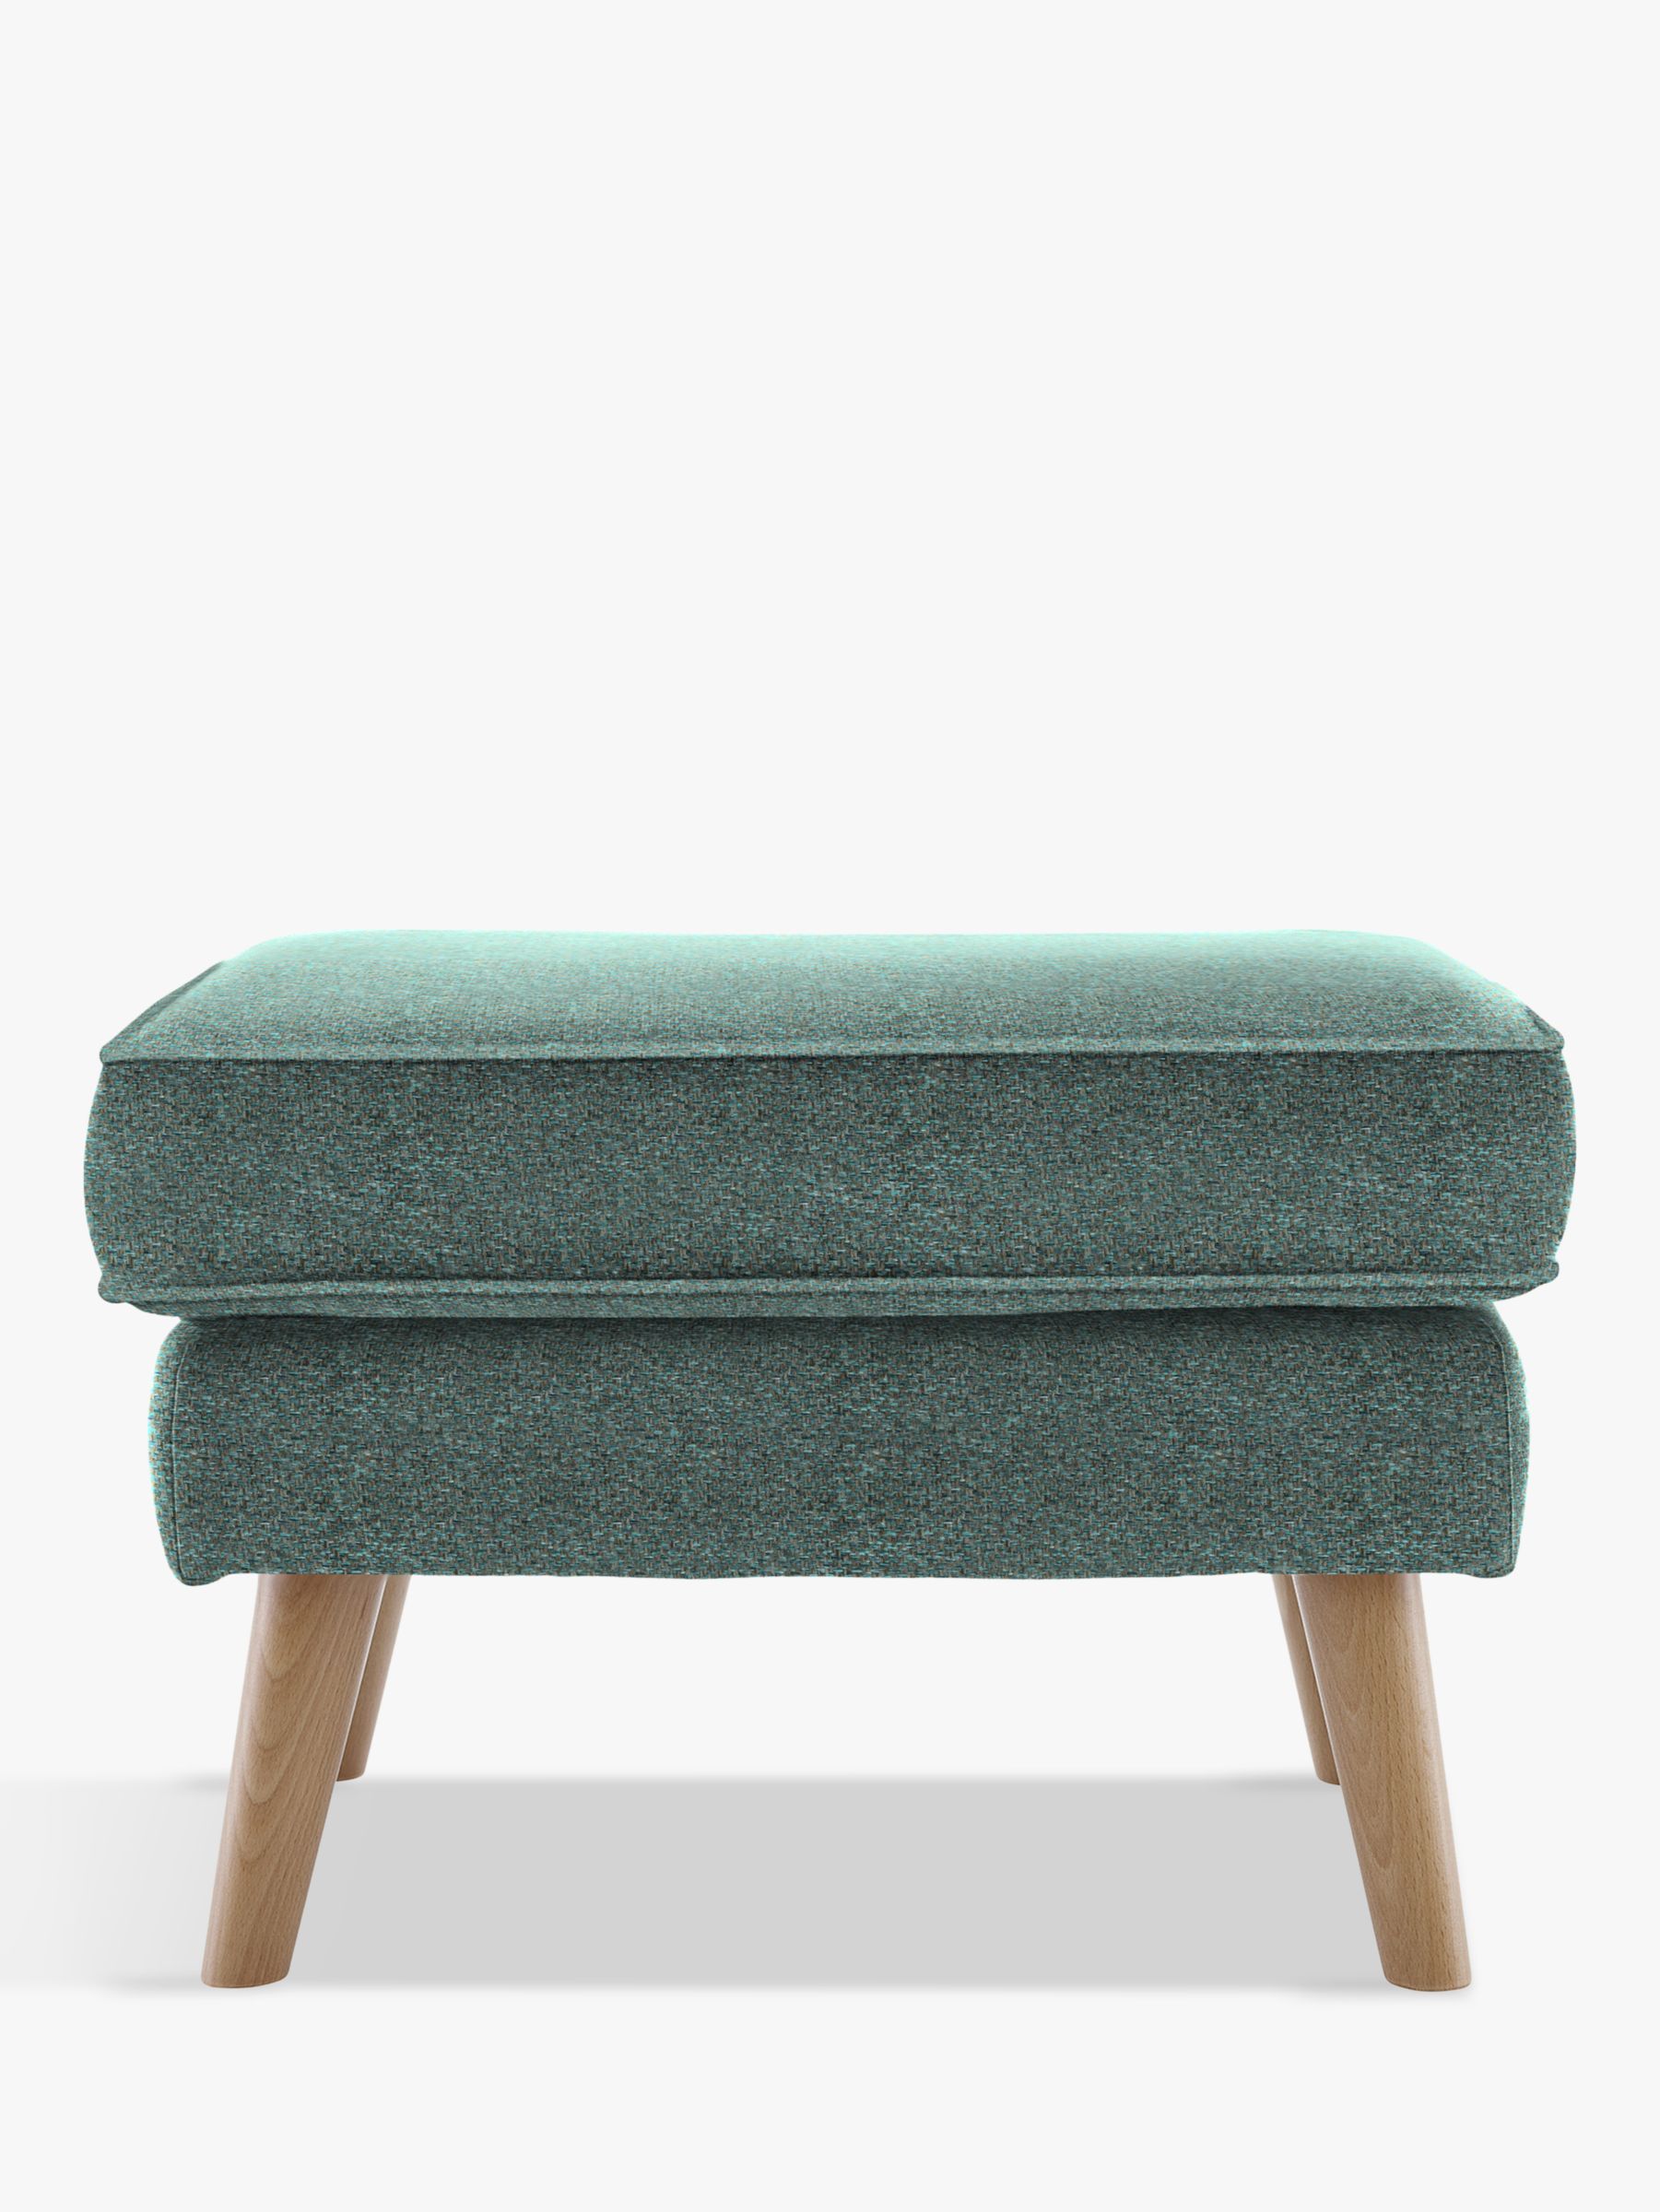 The Sixty Five Range, G Plan Vintage The Sixty Five Footstool, Sherbert Teal